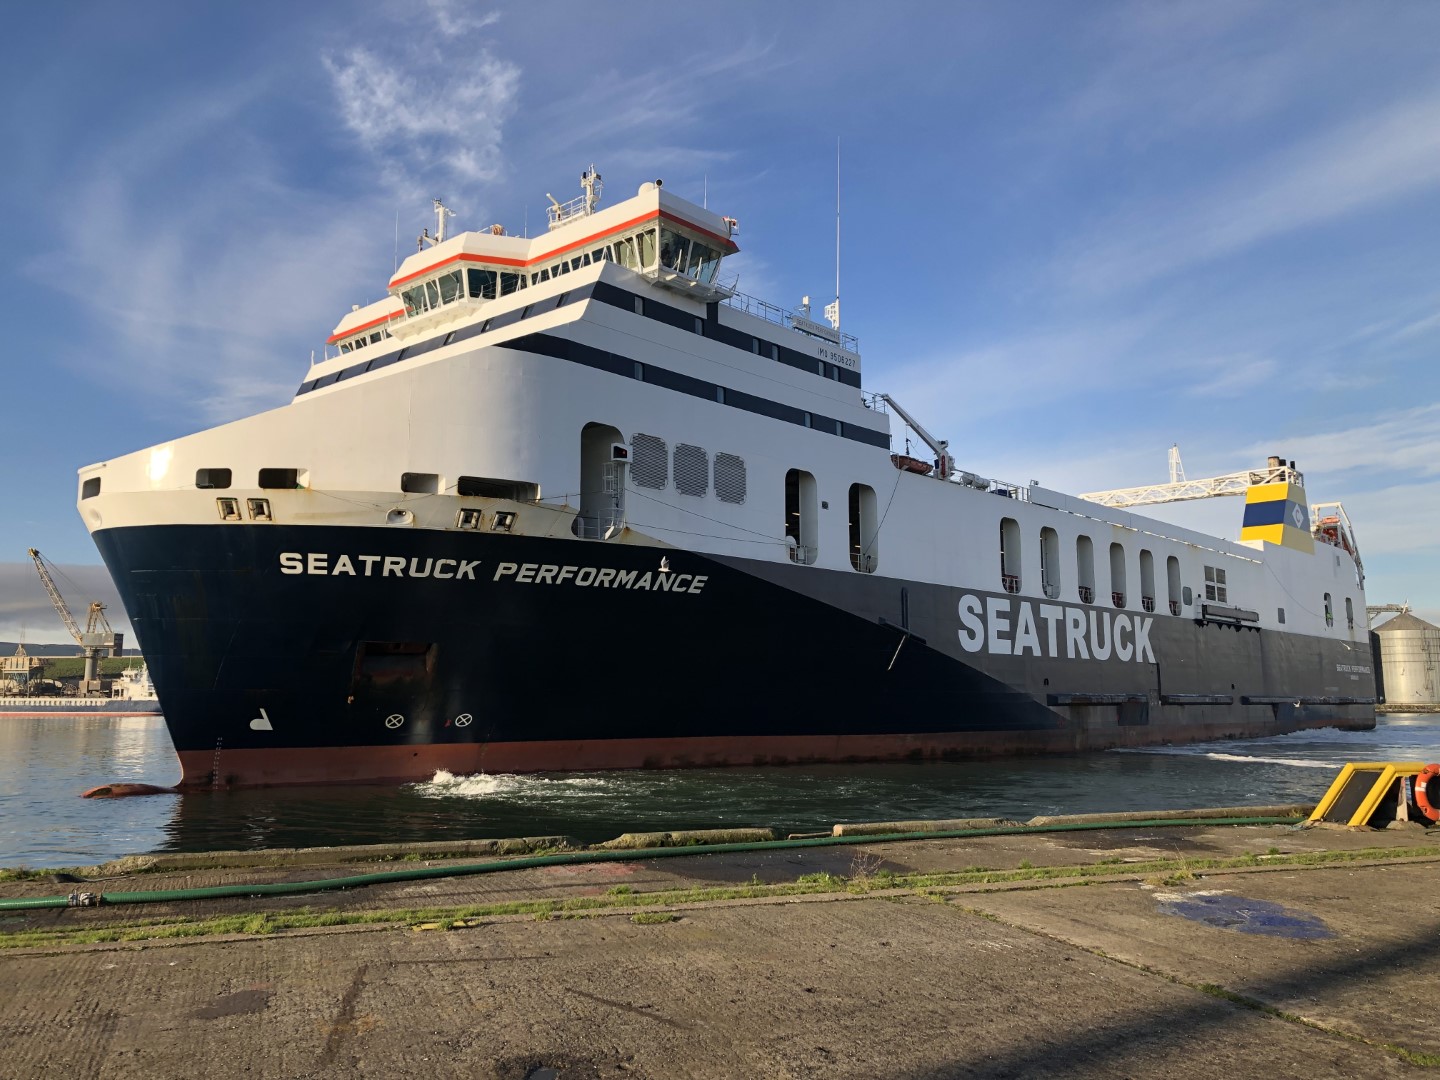 Royalty-free photo from Seatruck's "MV Performance"